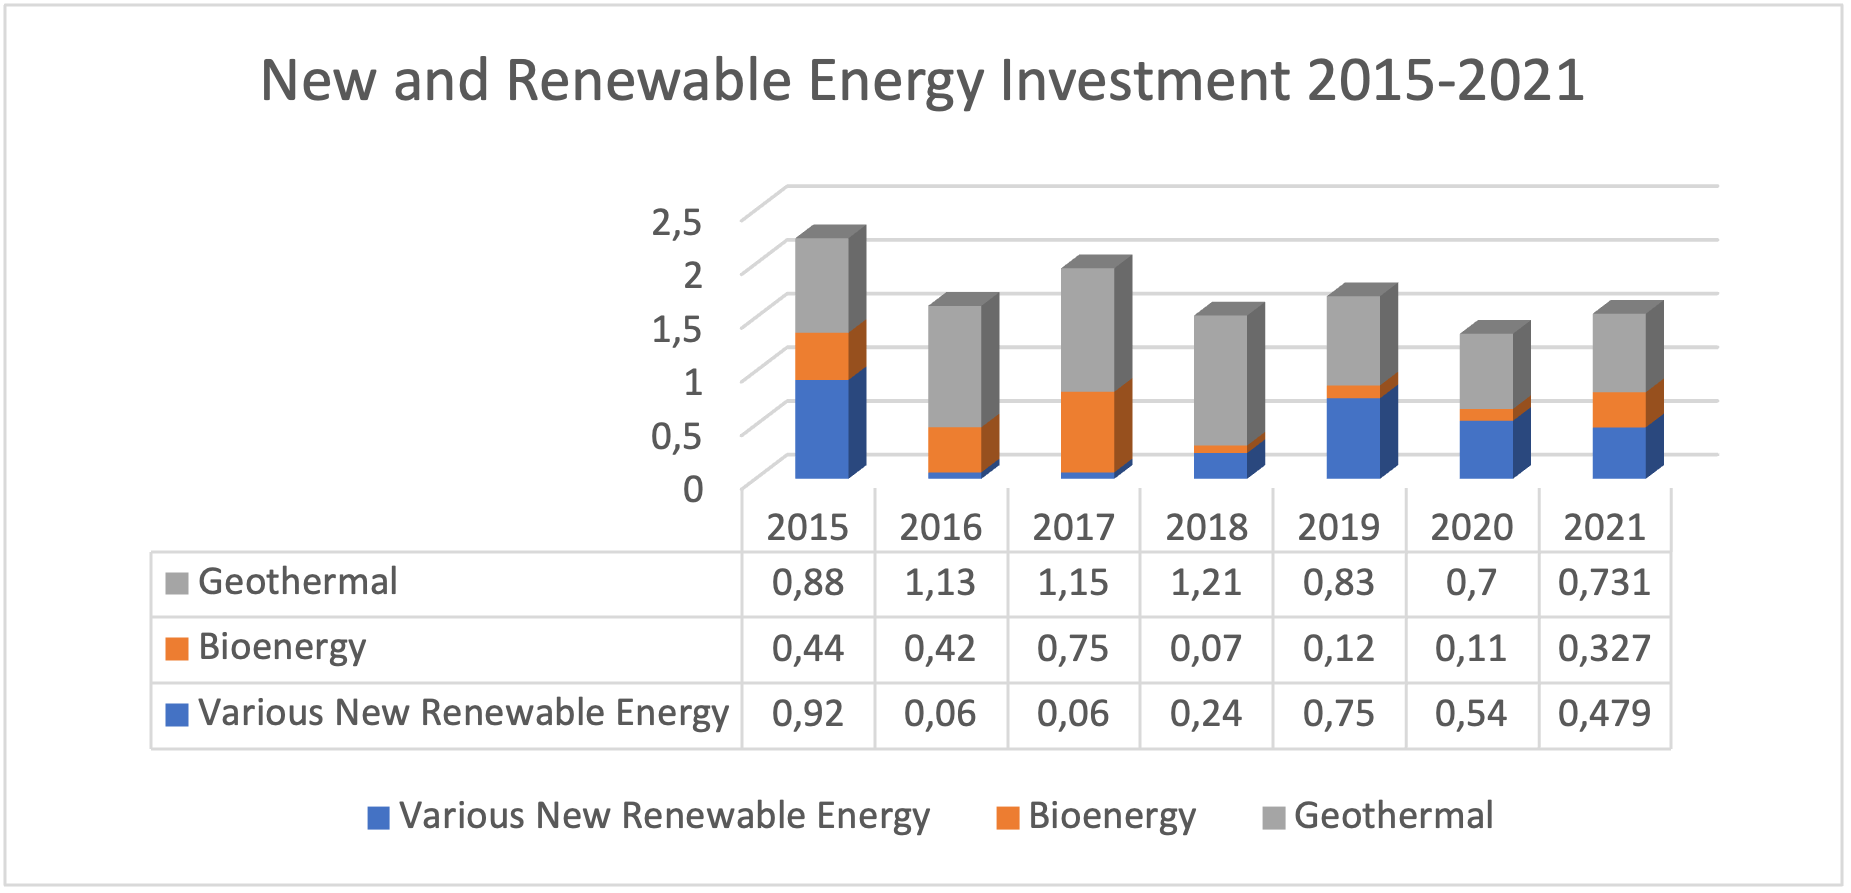 New and Renewable Energy Investment 2015-2021